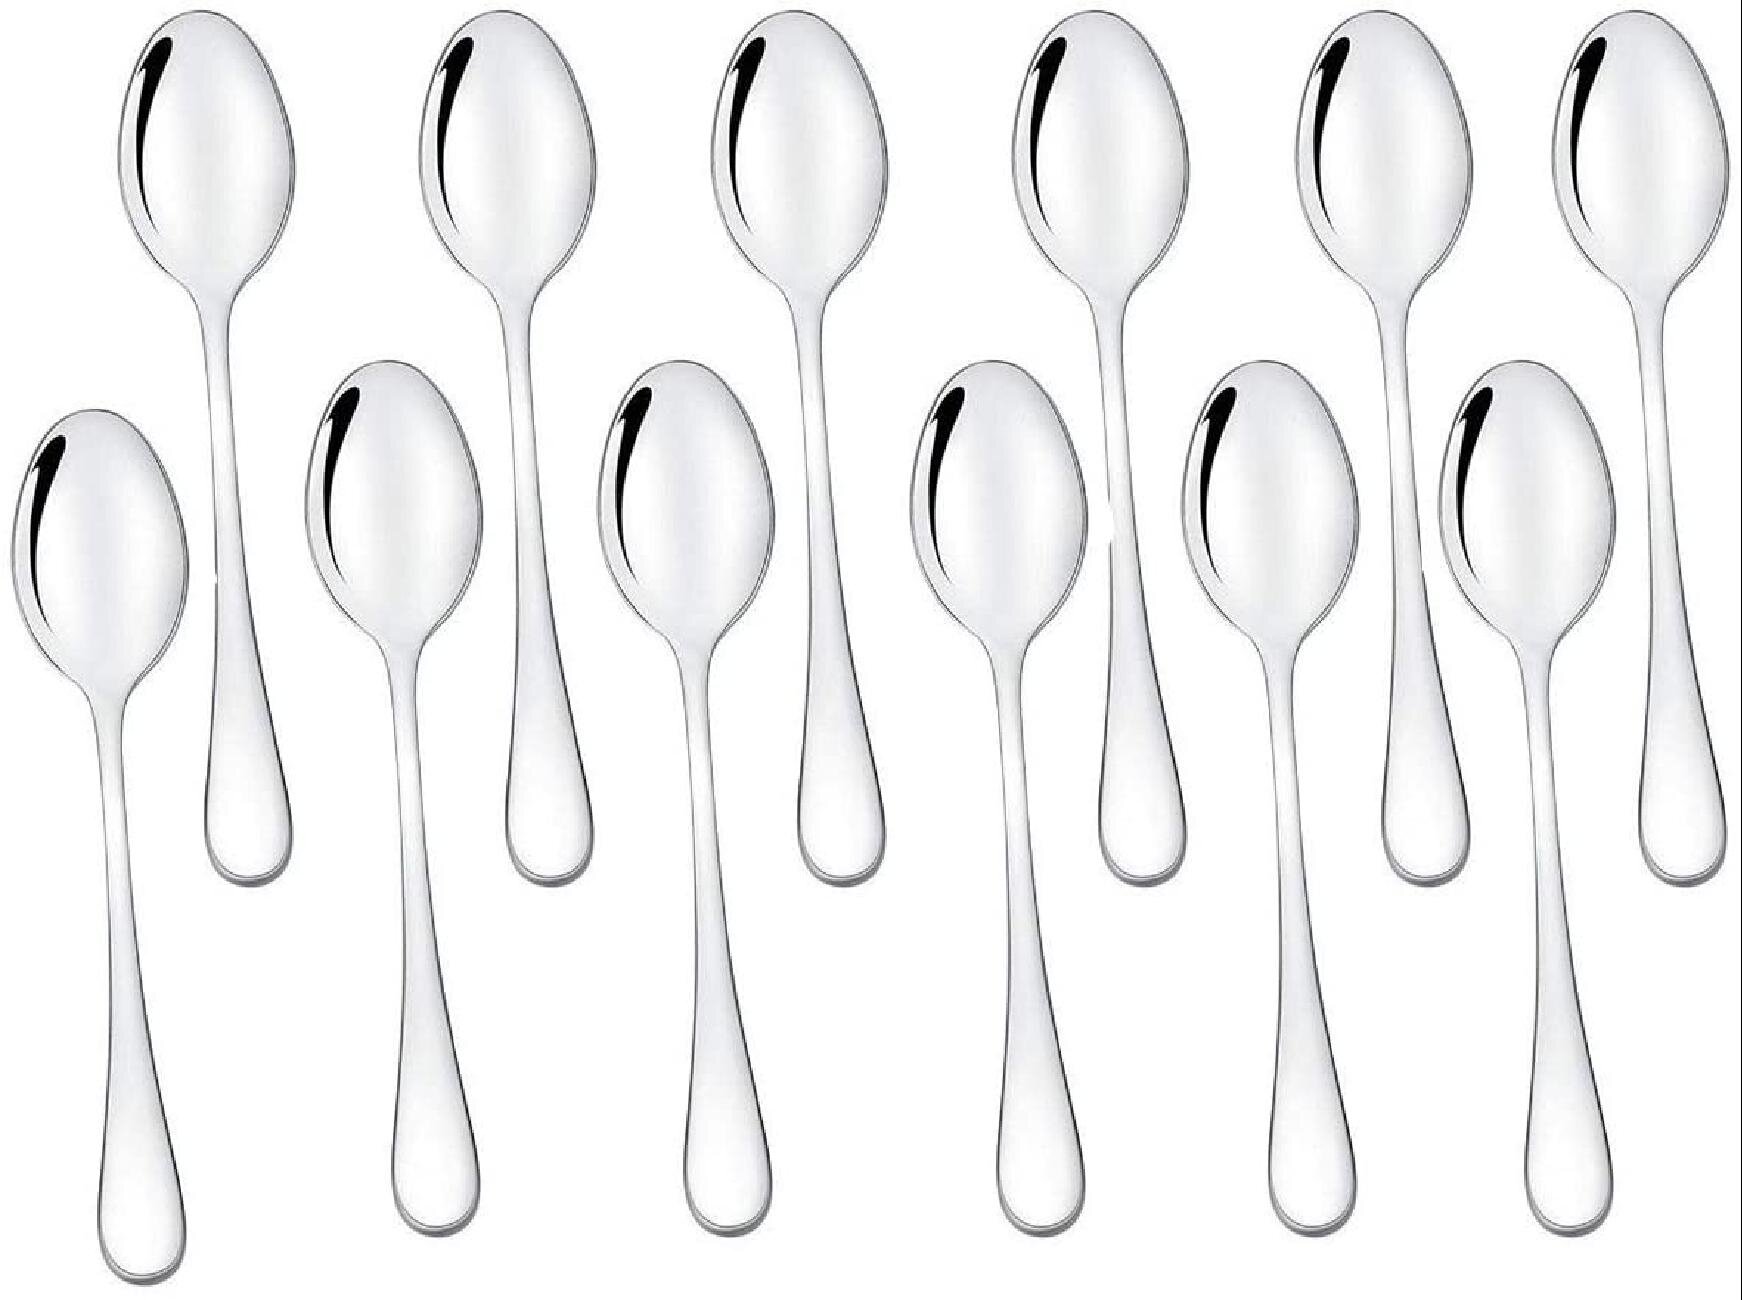 Stainless Steel Espresso Spoons Tea Mini Coffee Spoons 4 inch Demitasse Spoons Set of 12 Small Spoons for Dessert Appetizer 